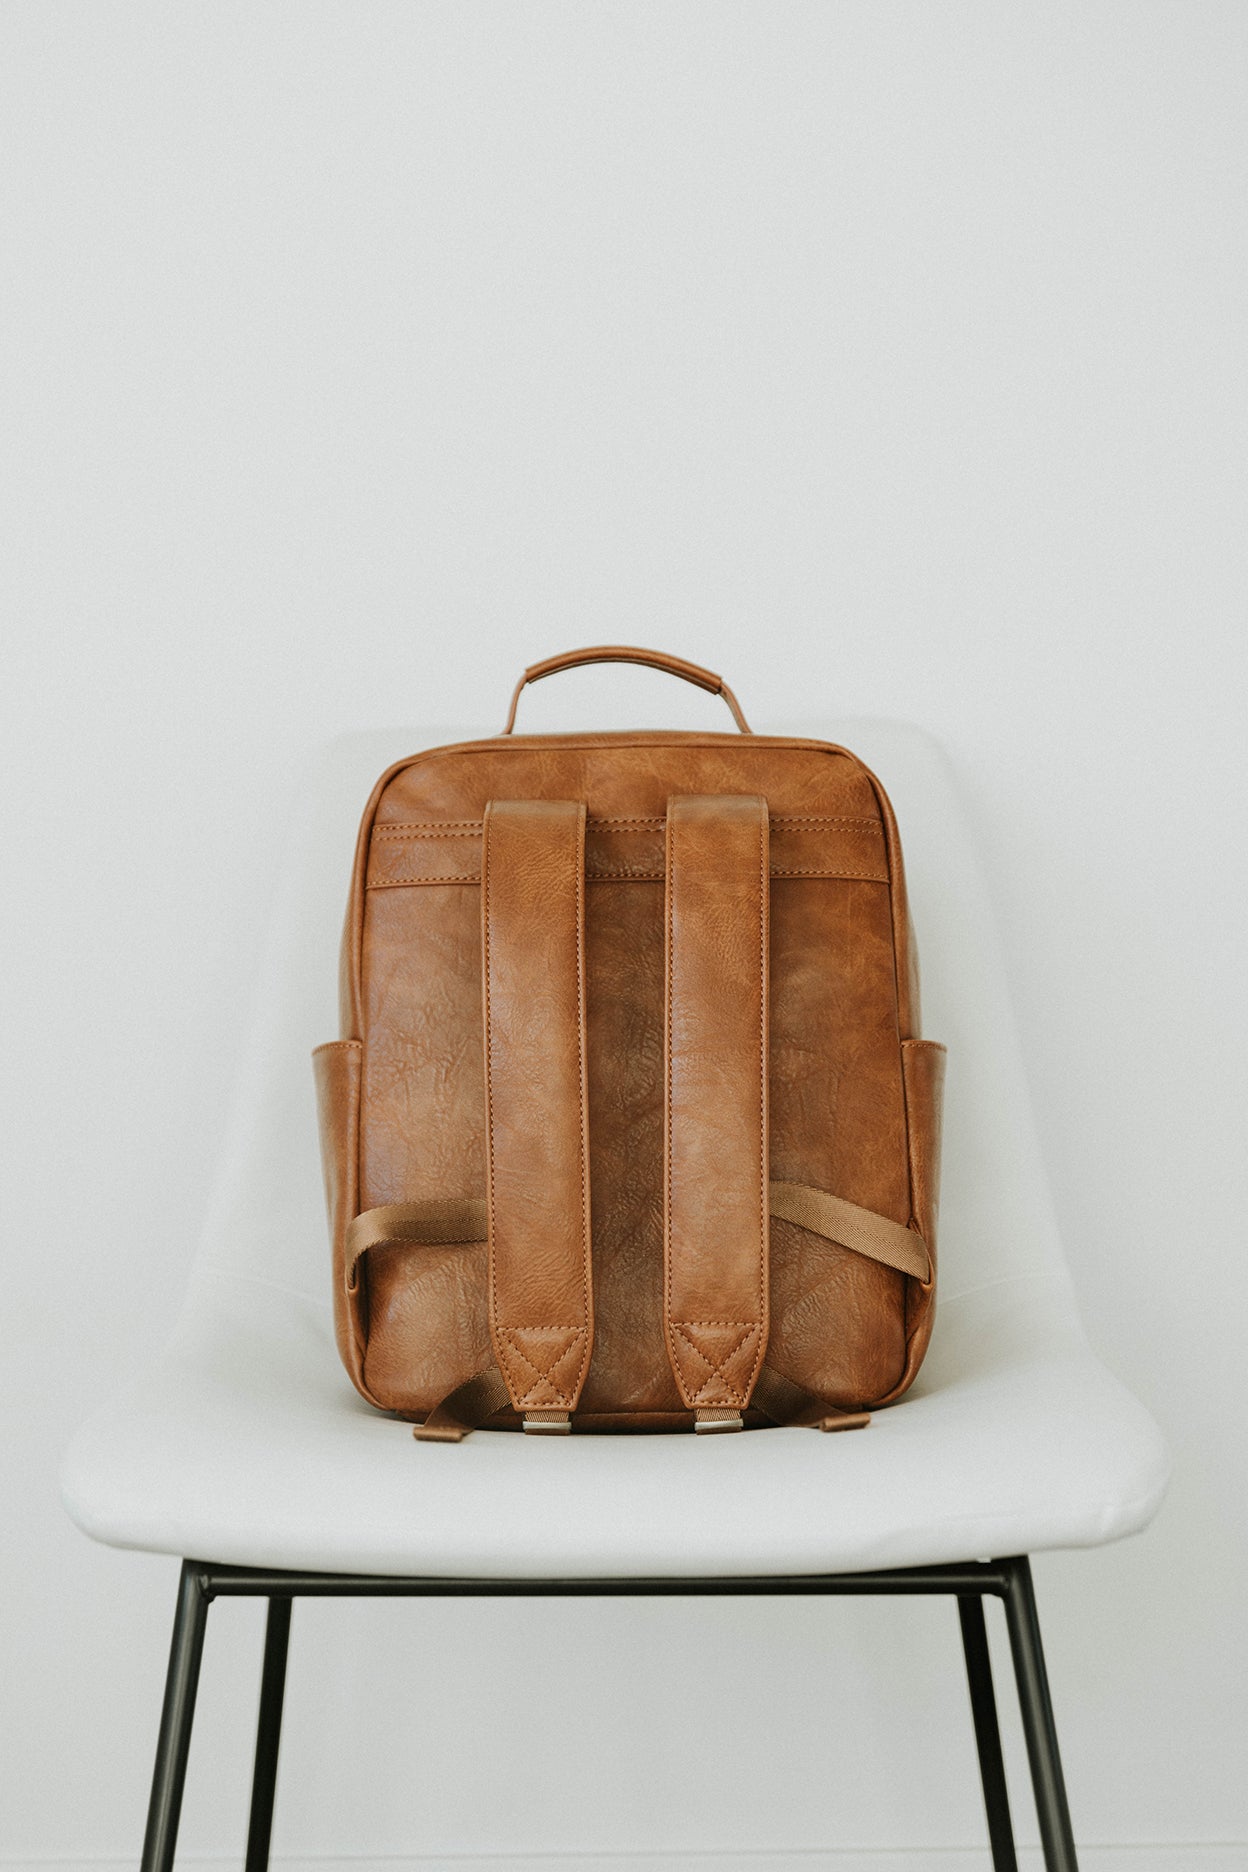 The Jenessa Midi- Our Mid-Size Camera Backpack (Brown is a Pre-Order for Late Oct. Shipping)